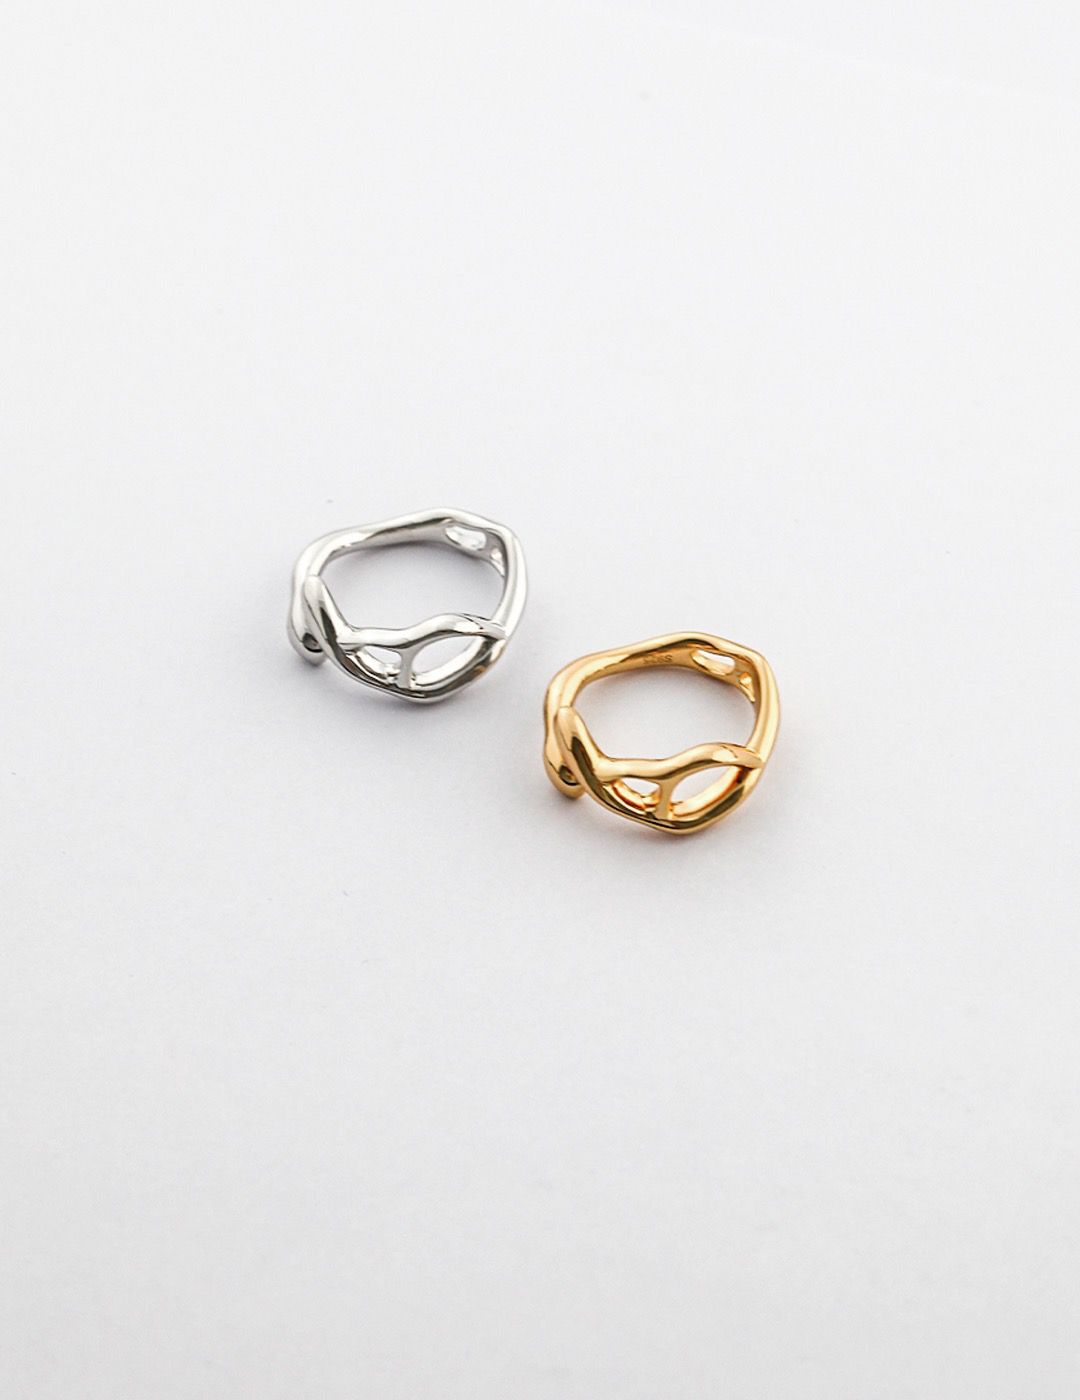 Minimalist Chic Ring with Clean and Streamlined Design